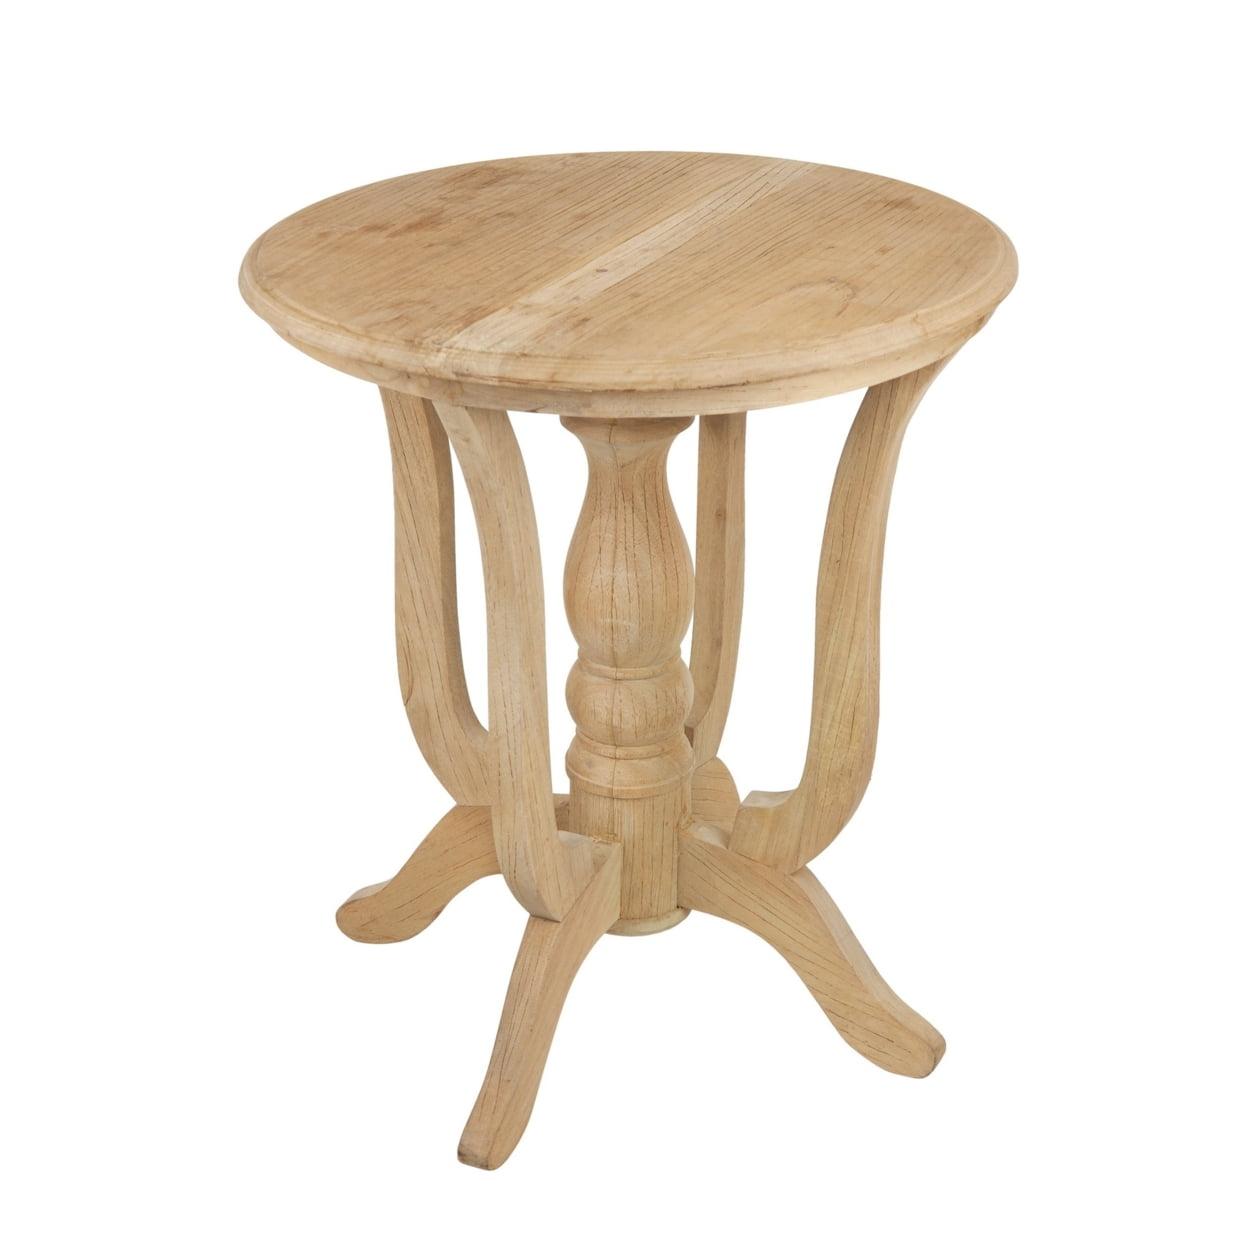 Classical Round Wood Side Table with Turned Legs, 28" Brown